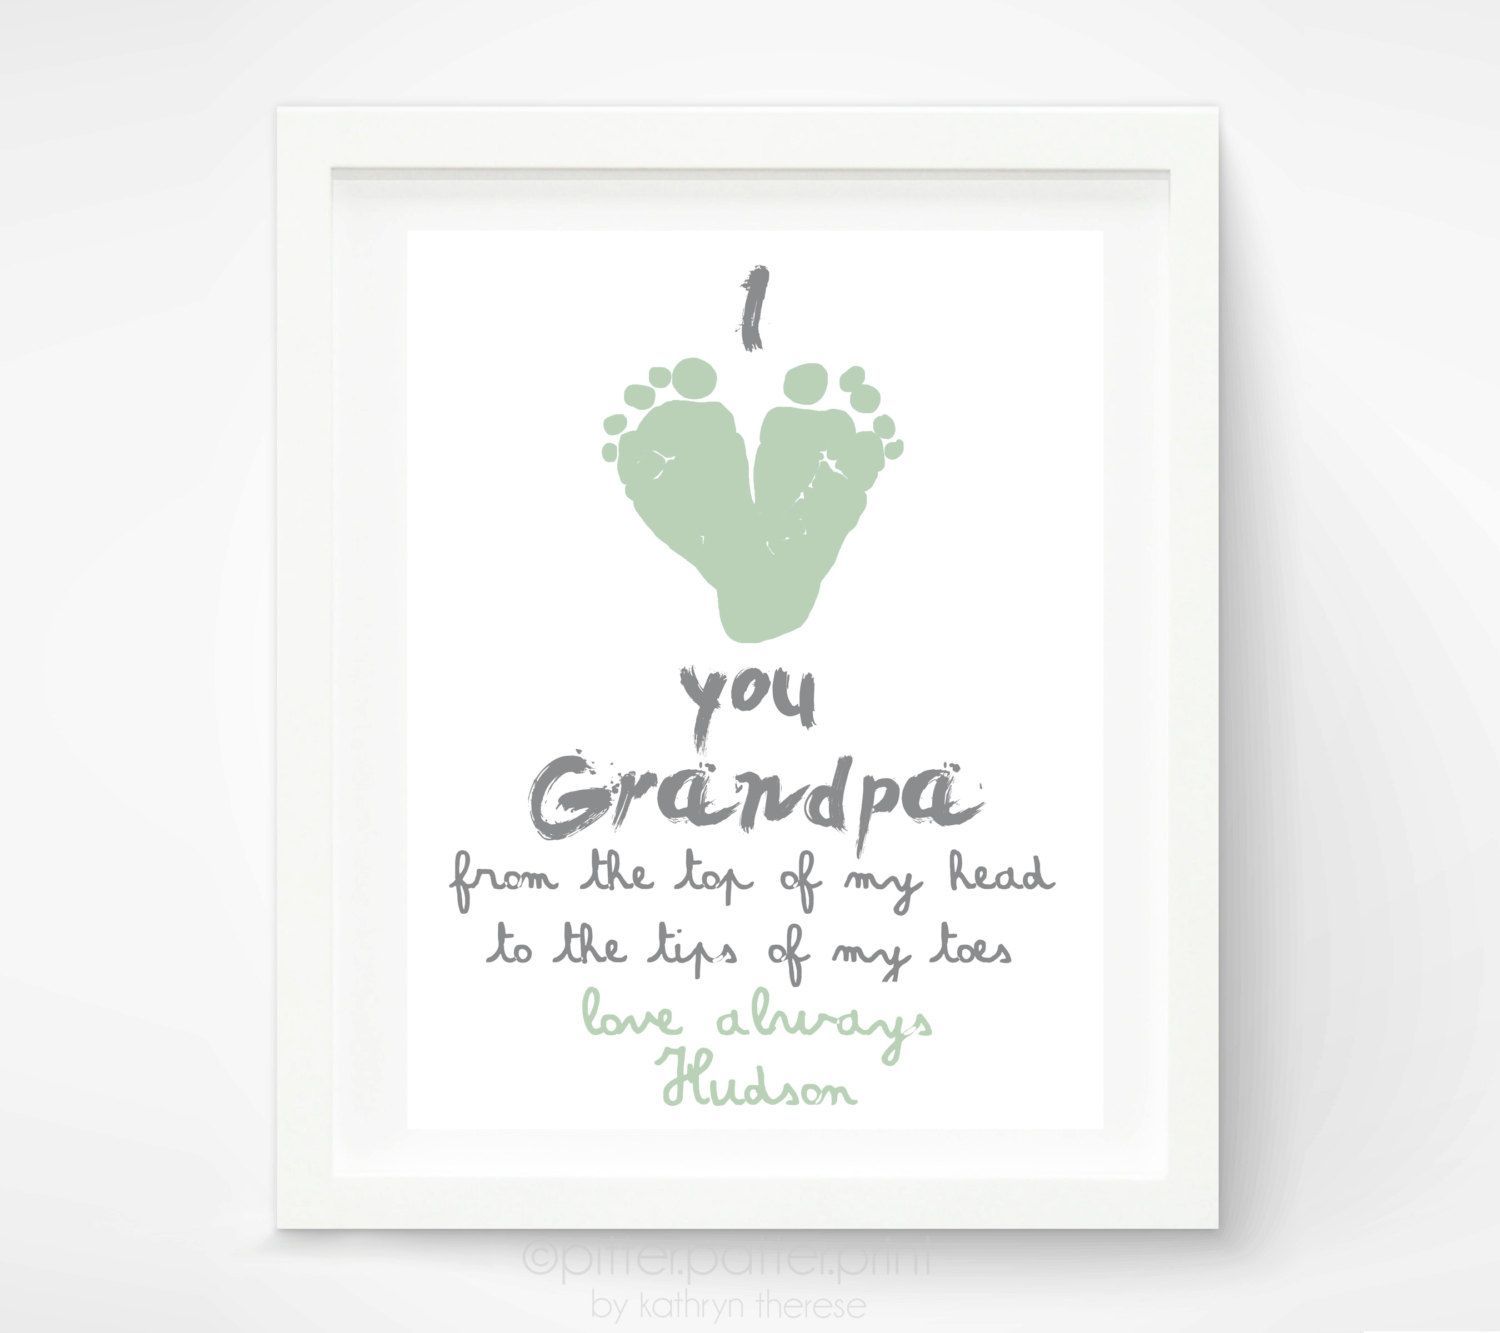 Fathers Day Gifts for grandpa from kids – Google Search- cute and simple idea. I